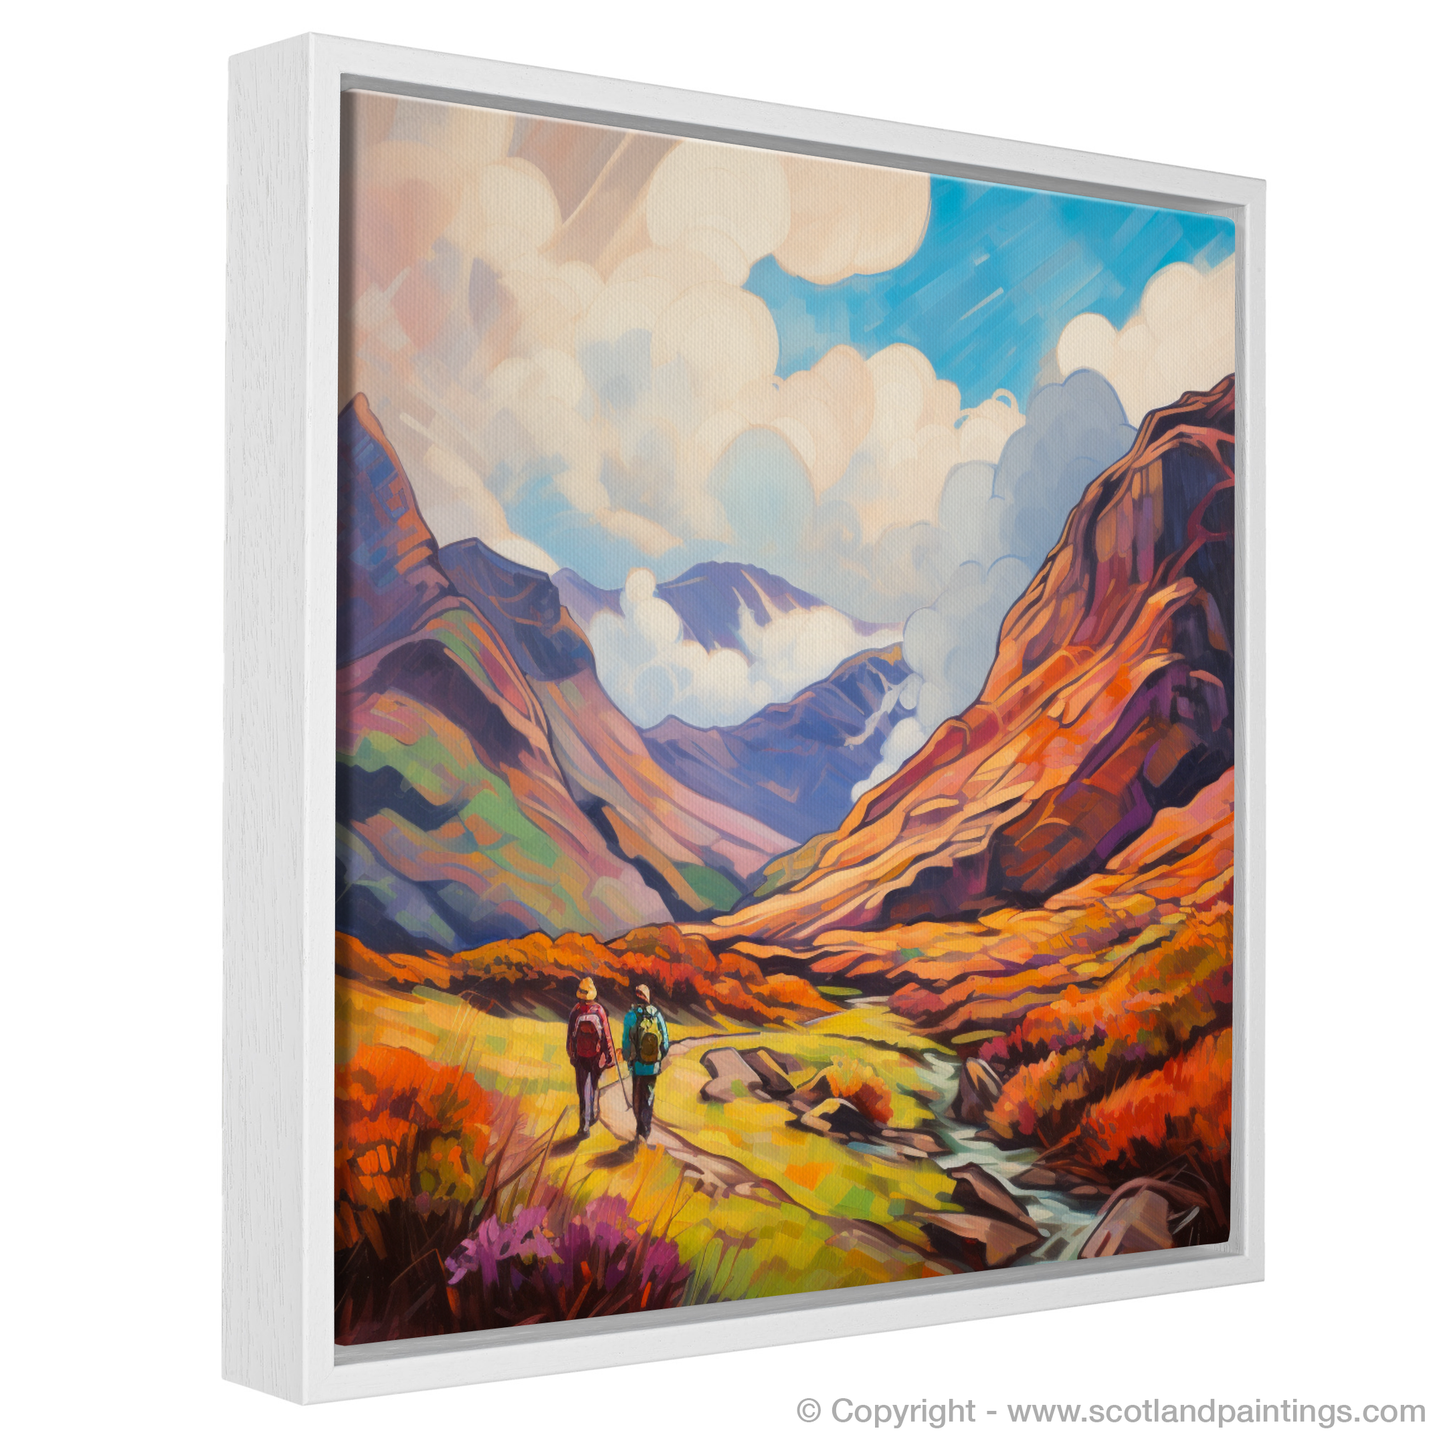 Painting and Art Print of Hikers in Glencoe entitled "Highland Wanderers: An Impressionist Journey through Glencoe".